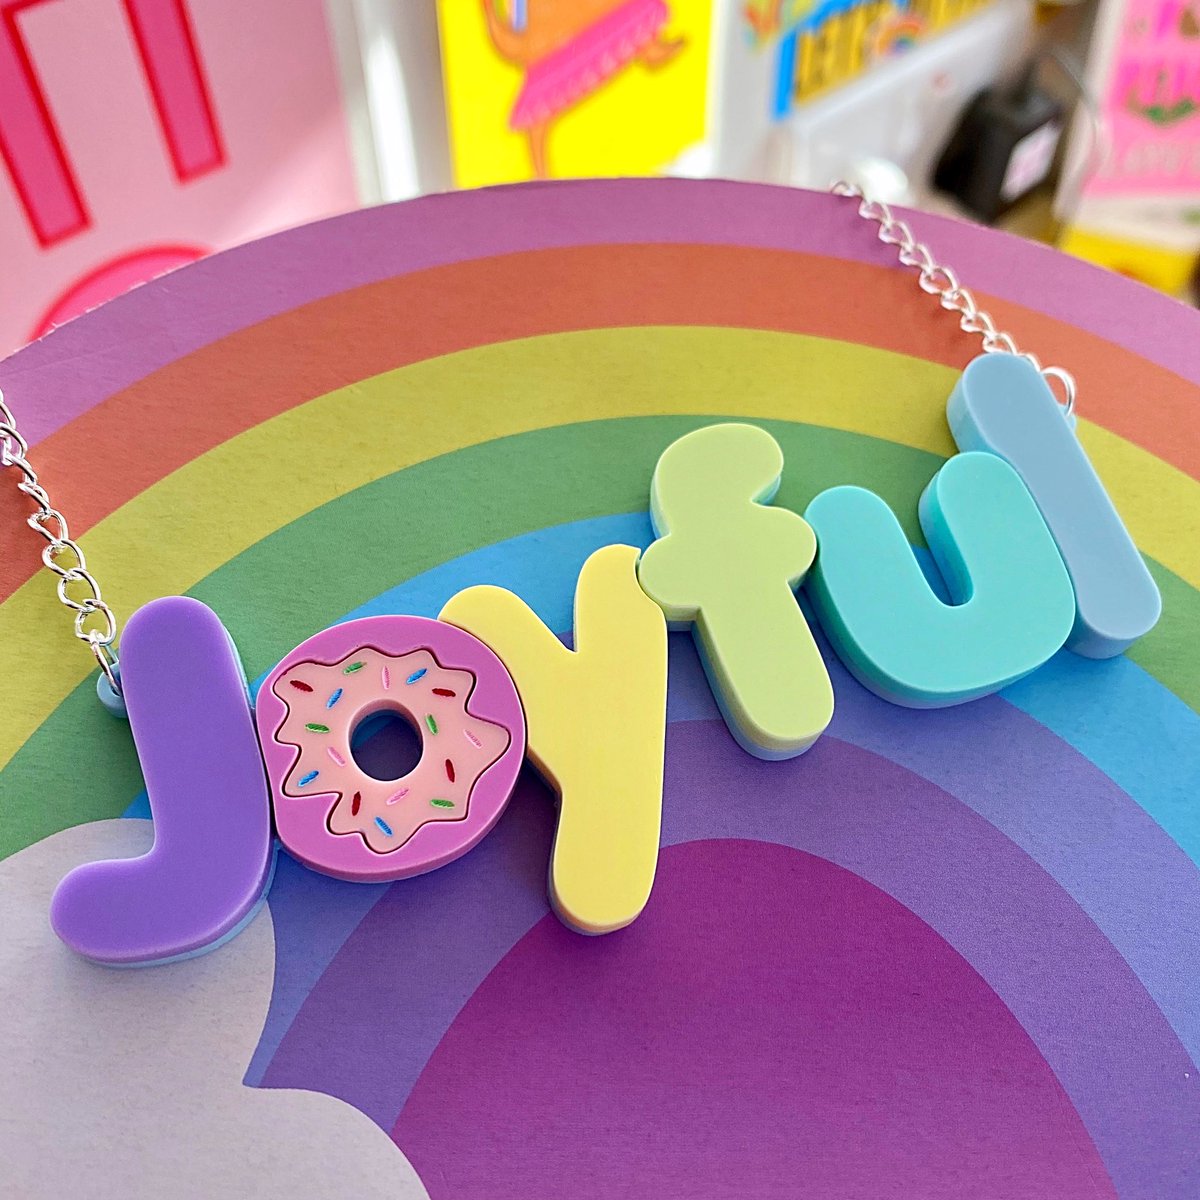 🌈FAVOURITE COLOUR & COMBO🌈 for @AdventuresTea #ColourMyEveryDay 
⁣⁣⁣
My favourite colour is pink (and also pastel and rainbow*) I mean, how can you choose?  ⁣⁣
⁣⁣
*I know that pastel & rainbow aren’t technically colours! 🌈💗
⁣⁣
#littlepigjewellerydesign #pastelrainbow